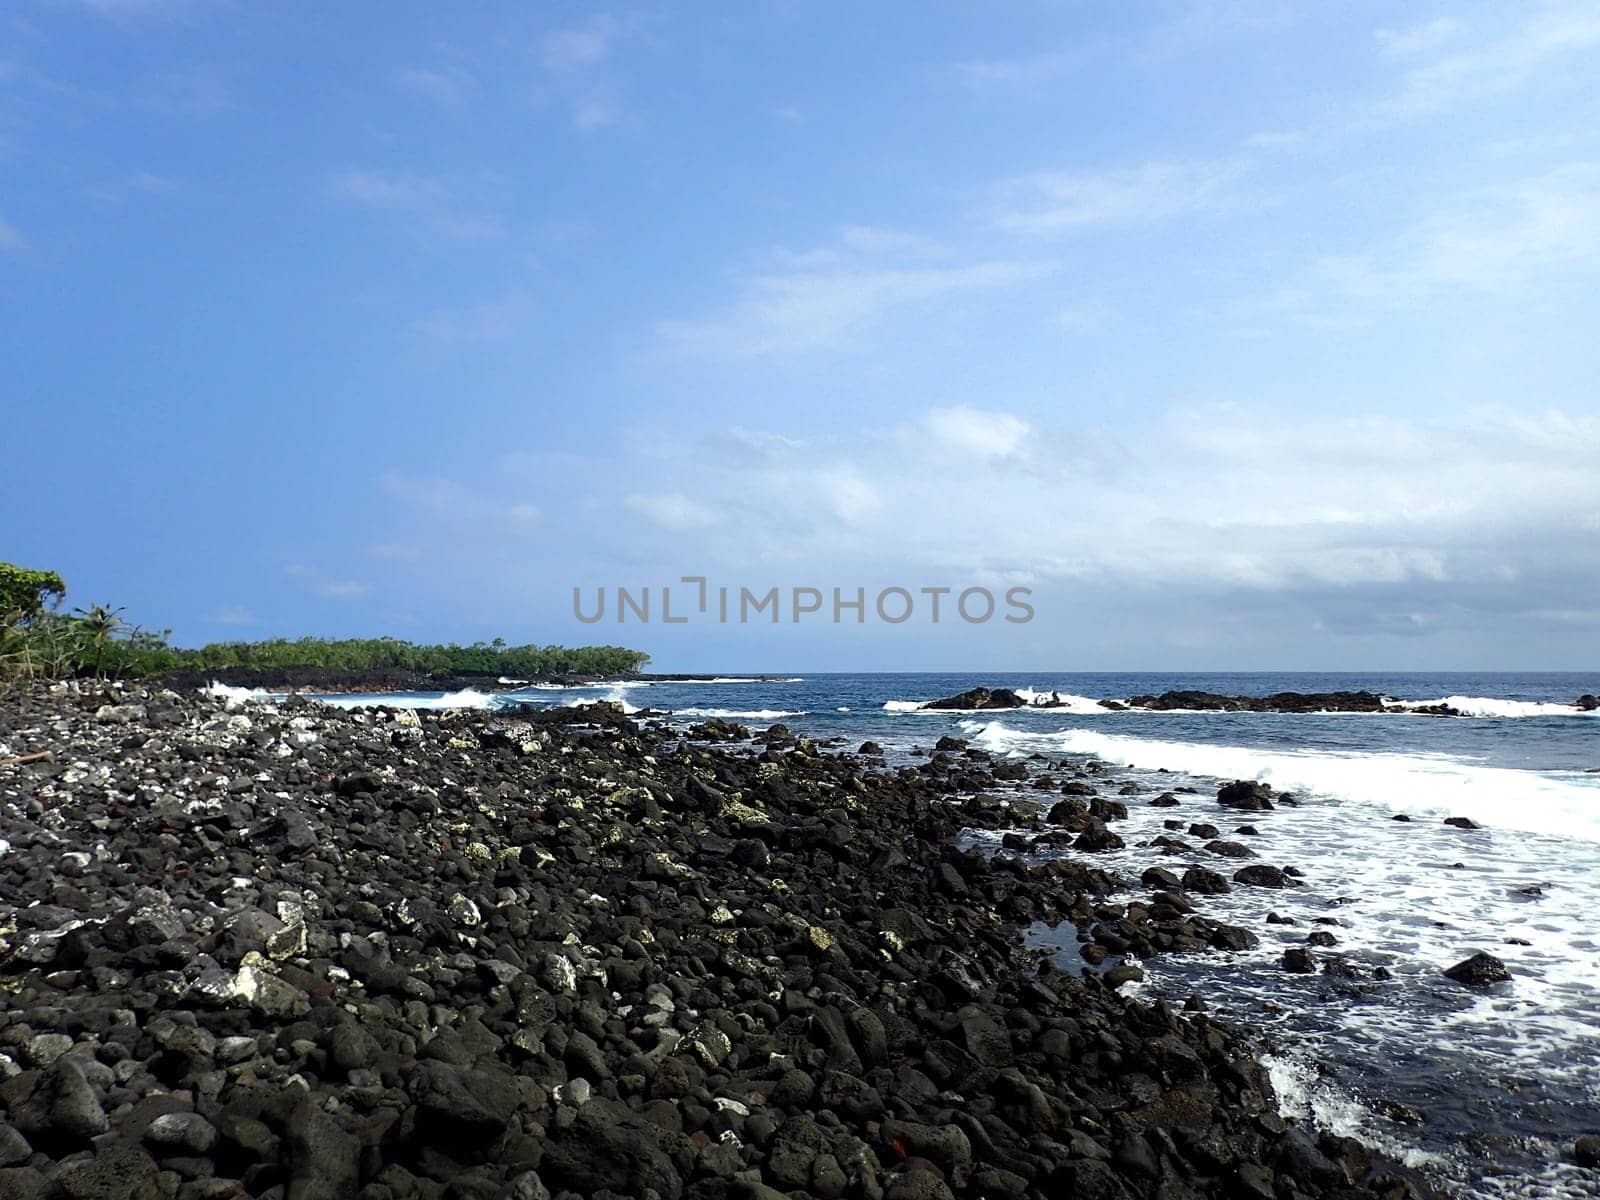 A beautiful view of the coast of Pahoa, Hawaii with blue skies and crashing waves. The photo shows the contrast between the black rocks and the white foam, and the calmness of the horizon and the movement of the water. The photo is taken from a distance, capturing the vastness and splendor of the island.